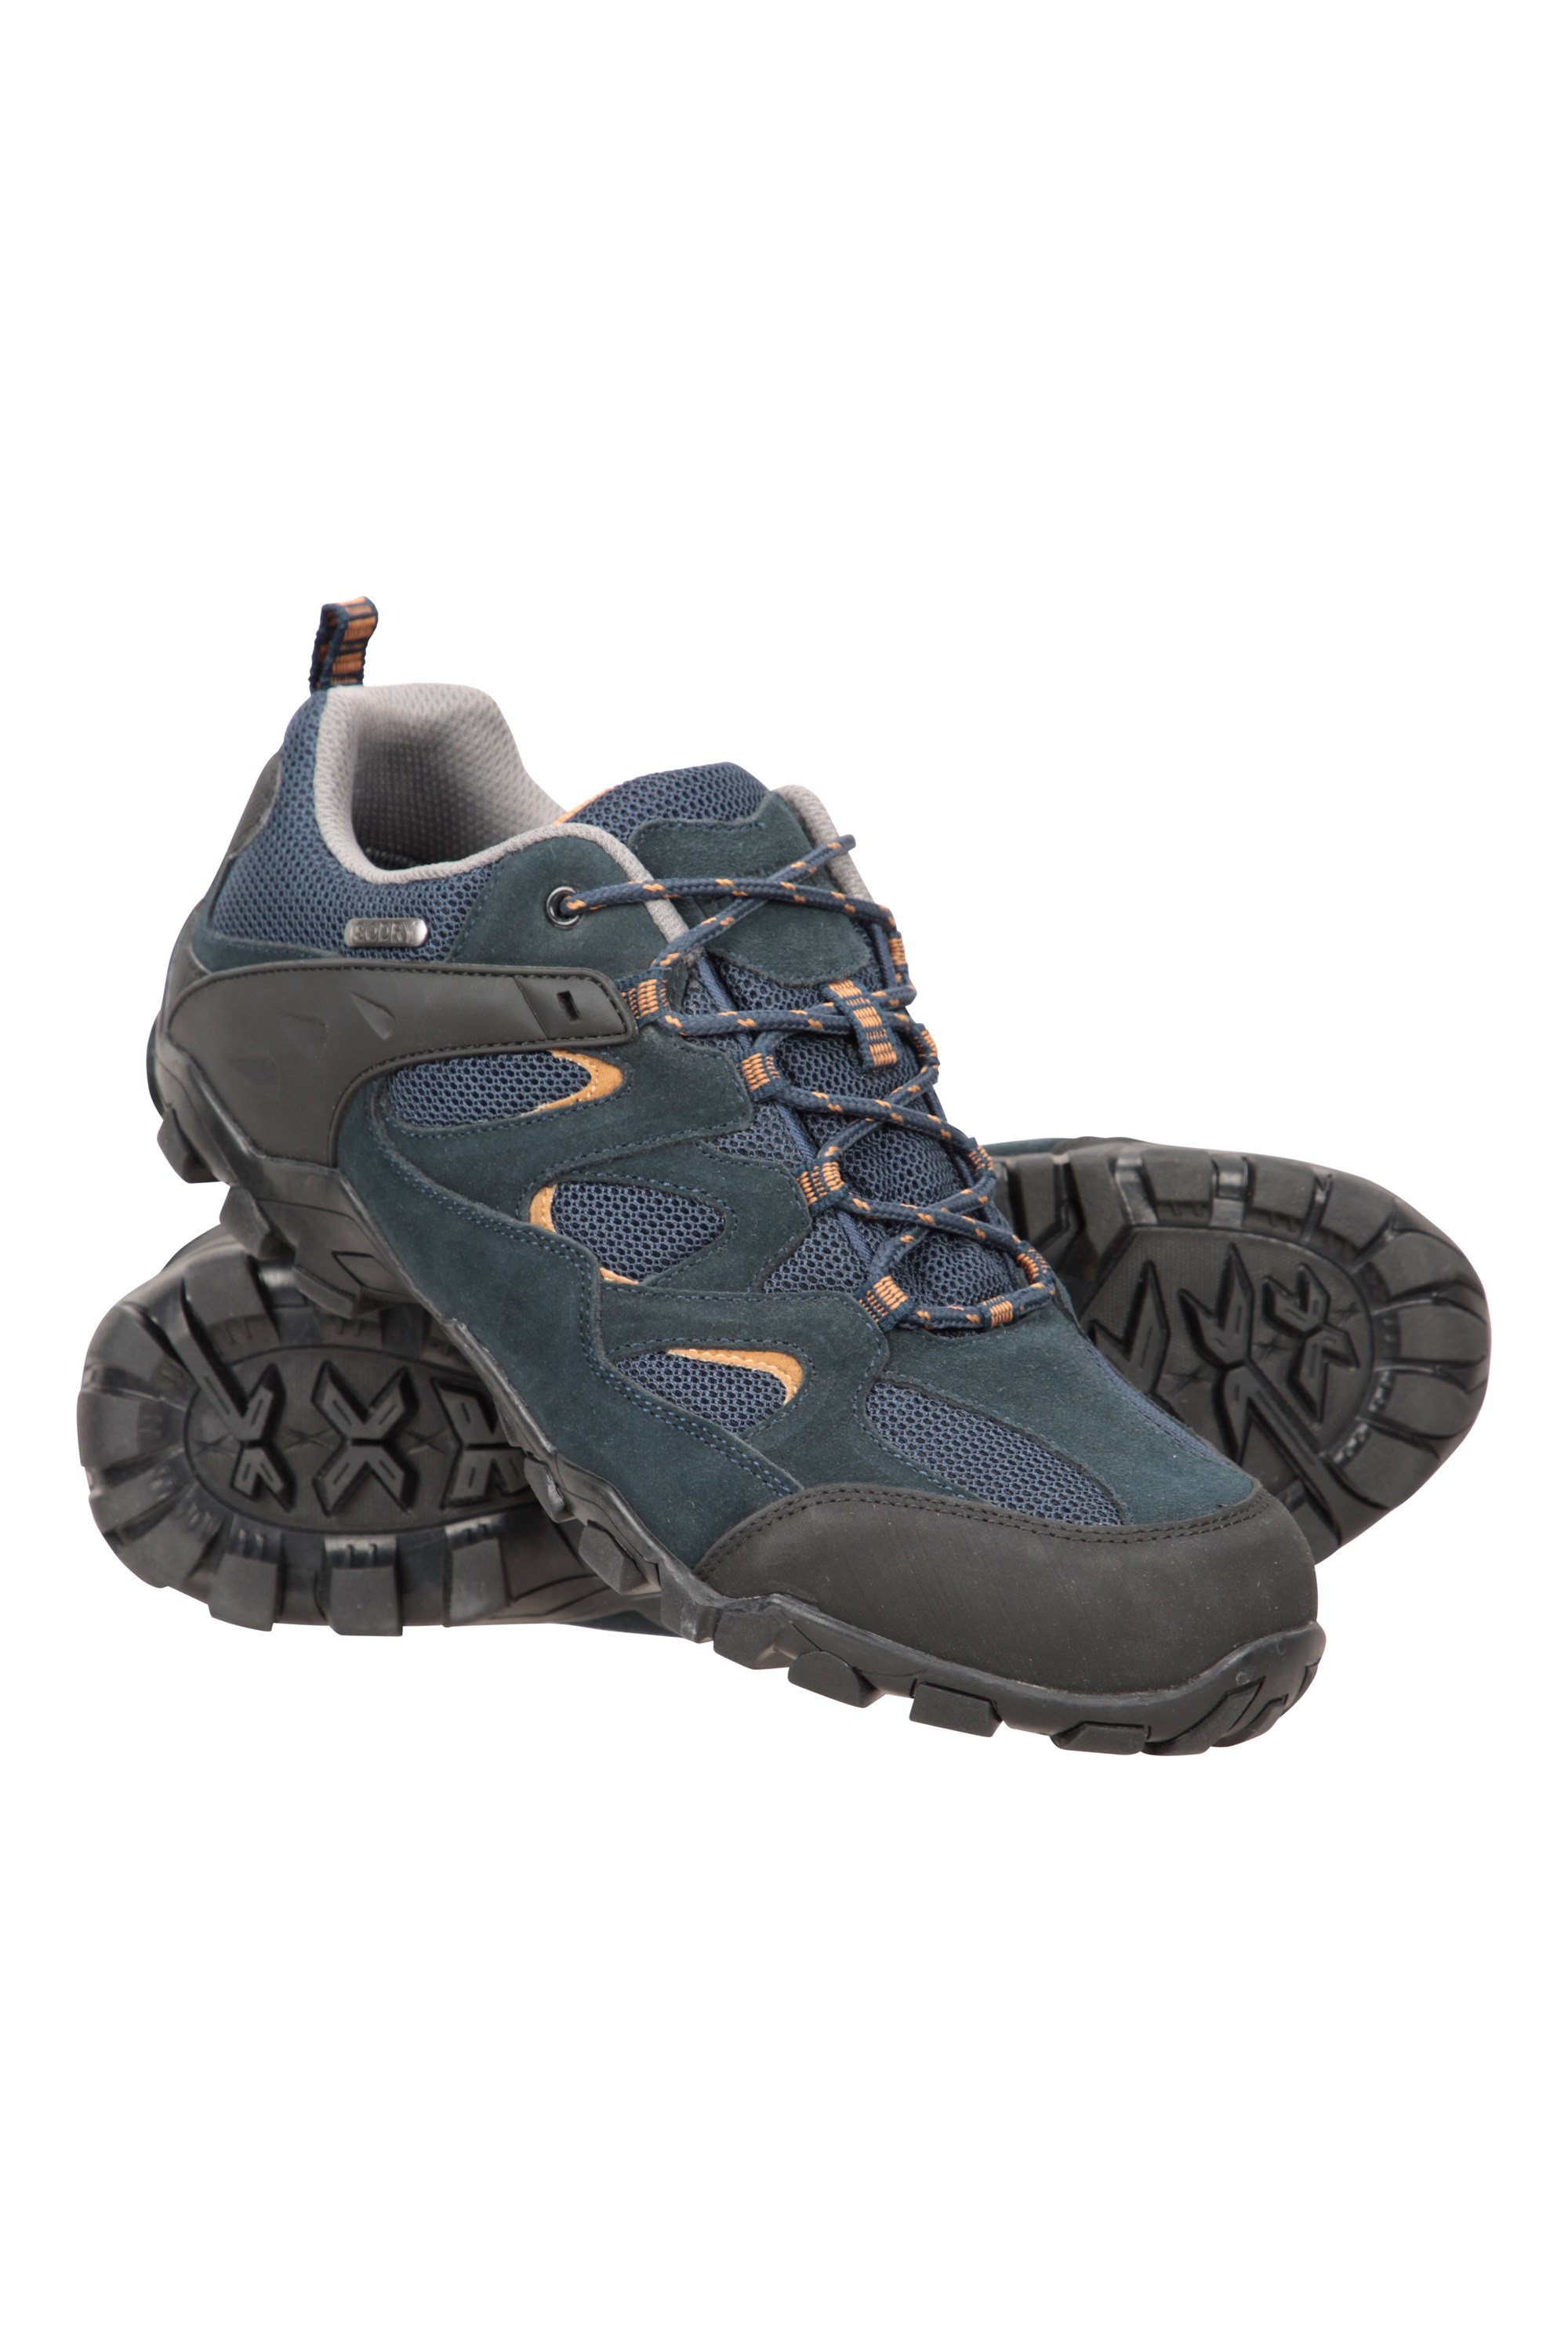 Mountain Warehouse Outdoor Mens Walking Shoes Suede Hiking Shoes Navy 8 M US Men 